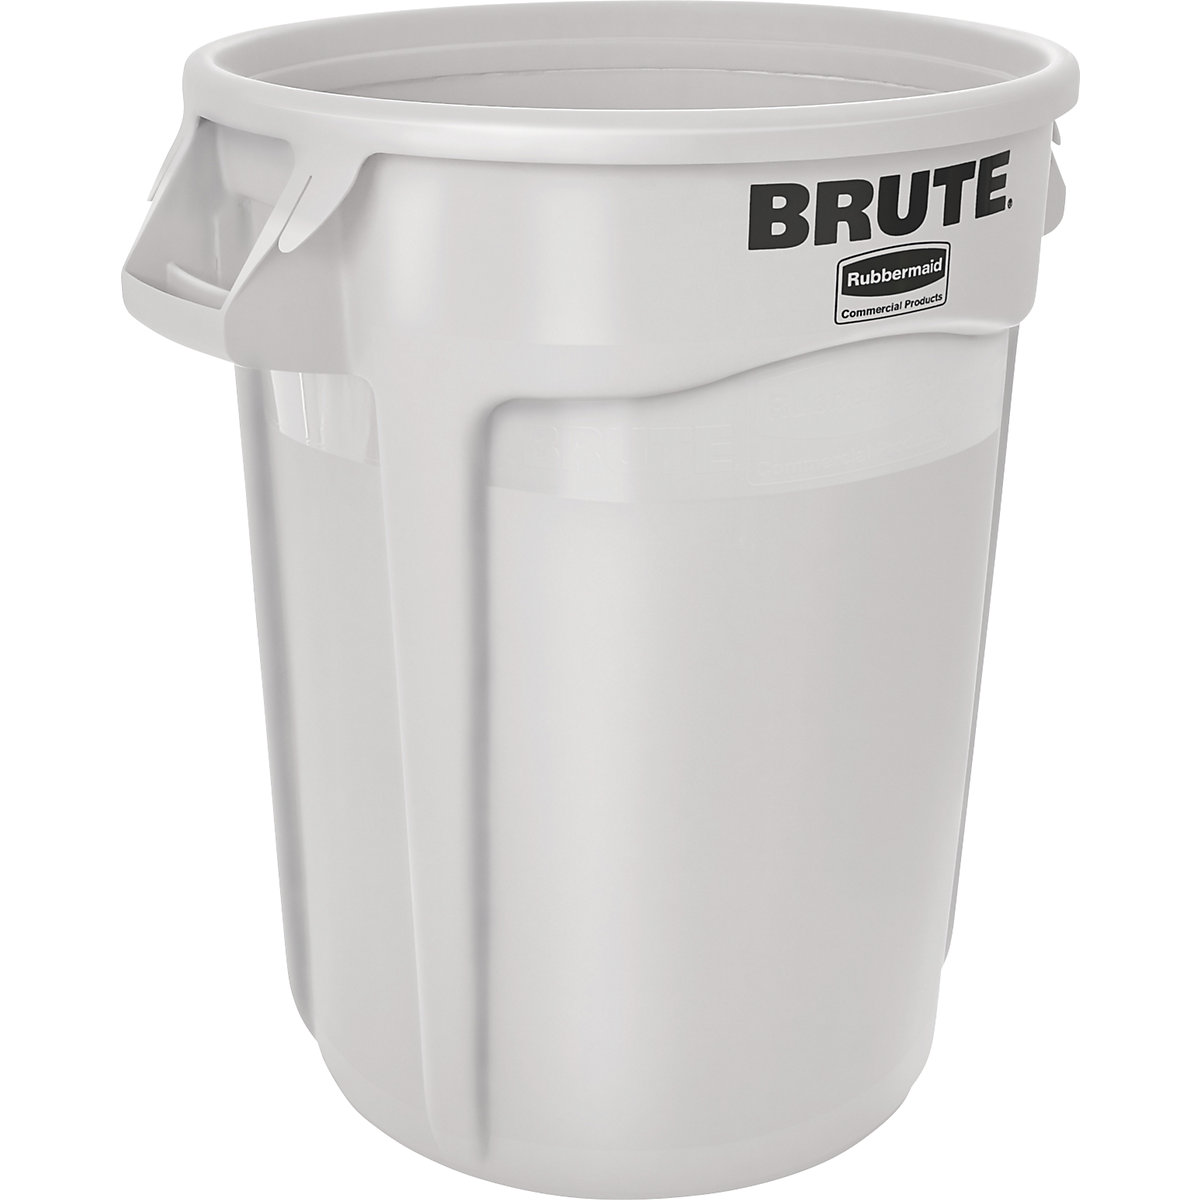 BRUTE® universal container, round – Rubbermaid, capacity 121 l, white-9